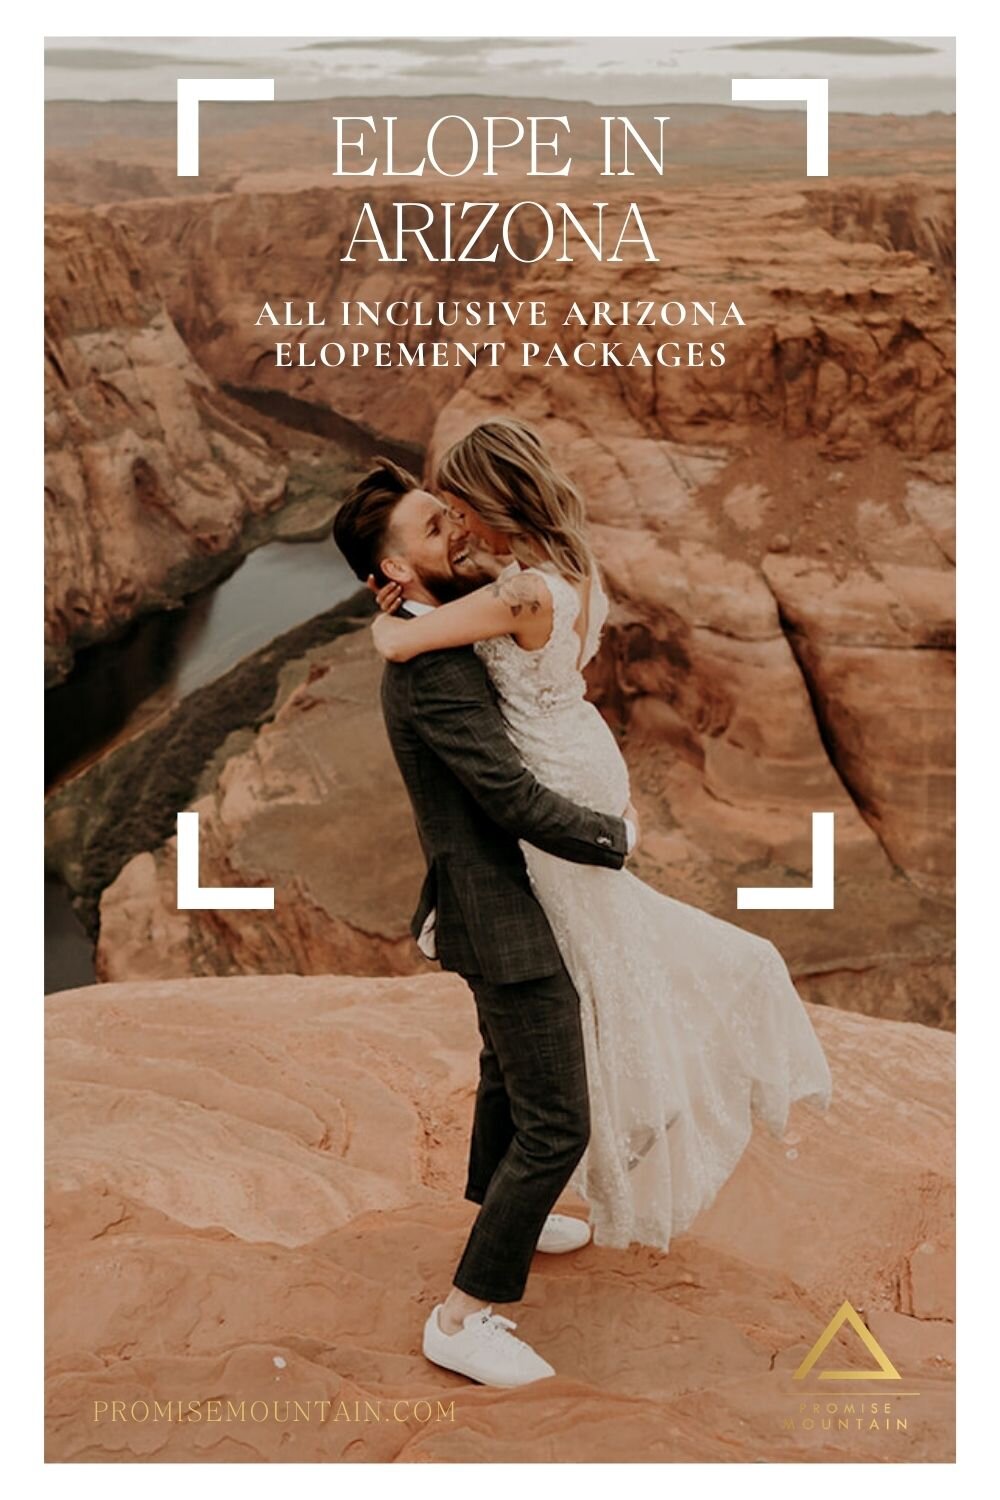 Groom lifts up bride as they smile together during their elopement at Horseshoe bend; image overlaid with text that reads Elope in Arizona All inclusive Arizona elopement packages